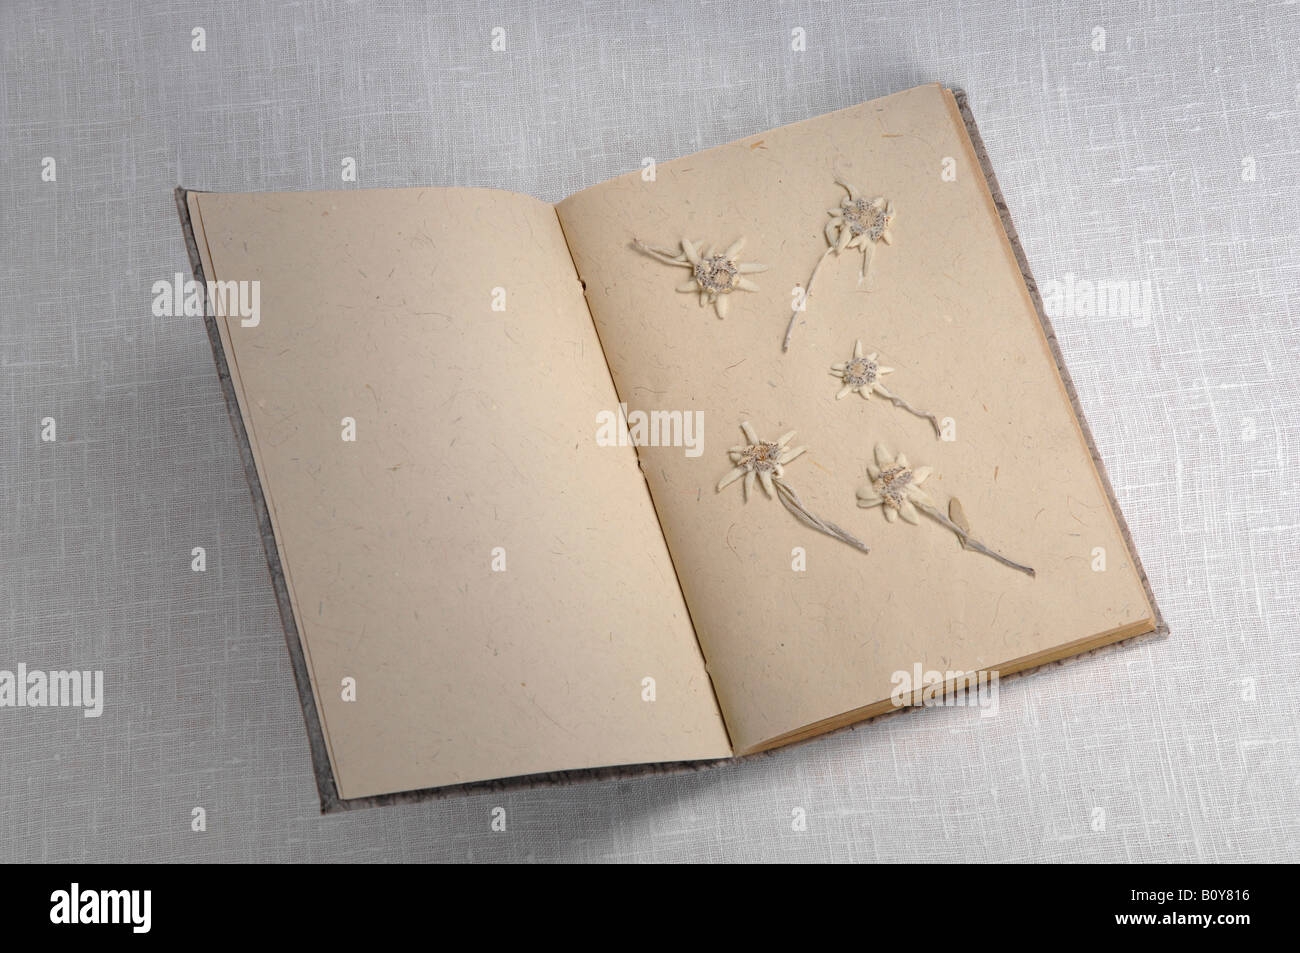 Edelweiss flowers (Leontopodium alpinum) in book, elevated view Stock Photo